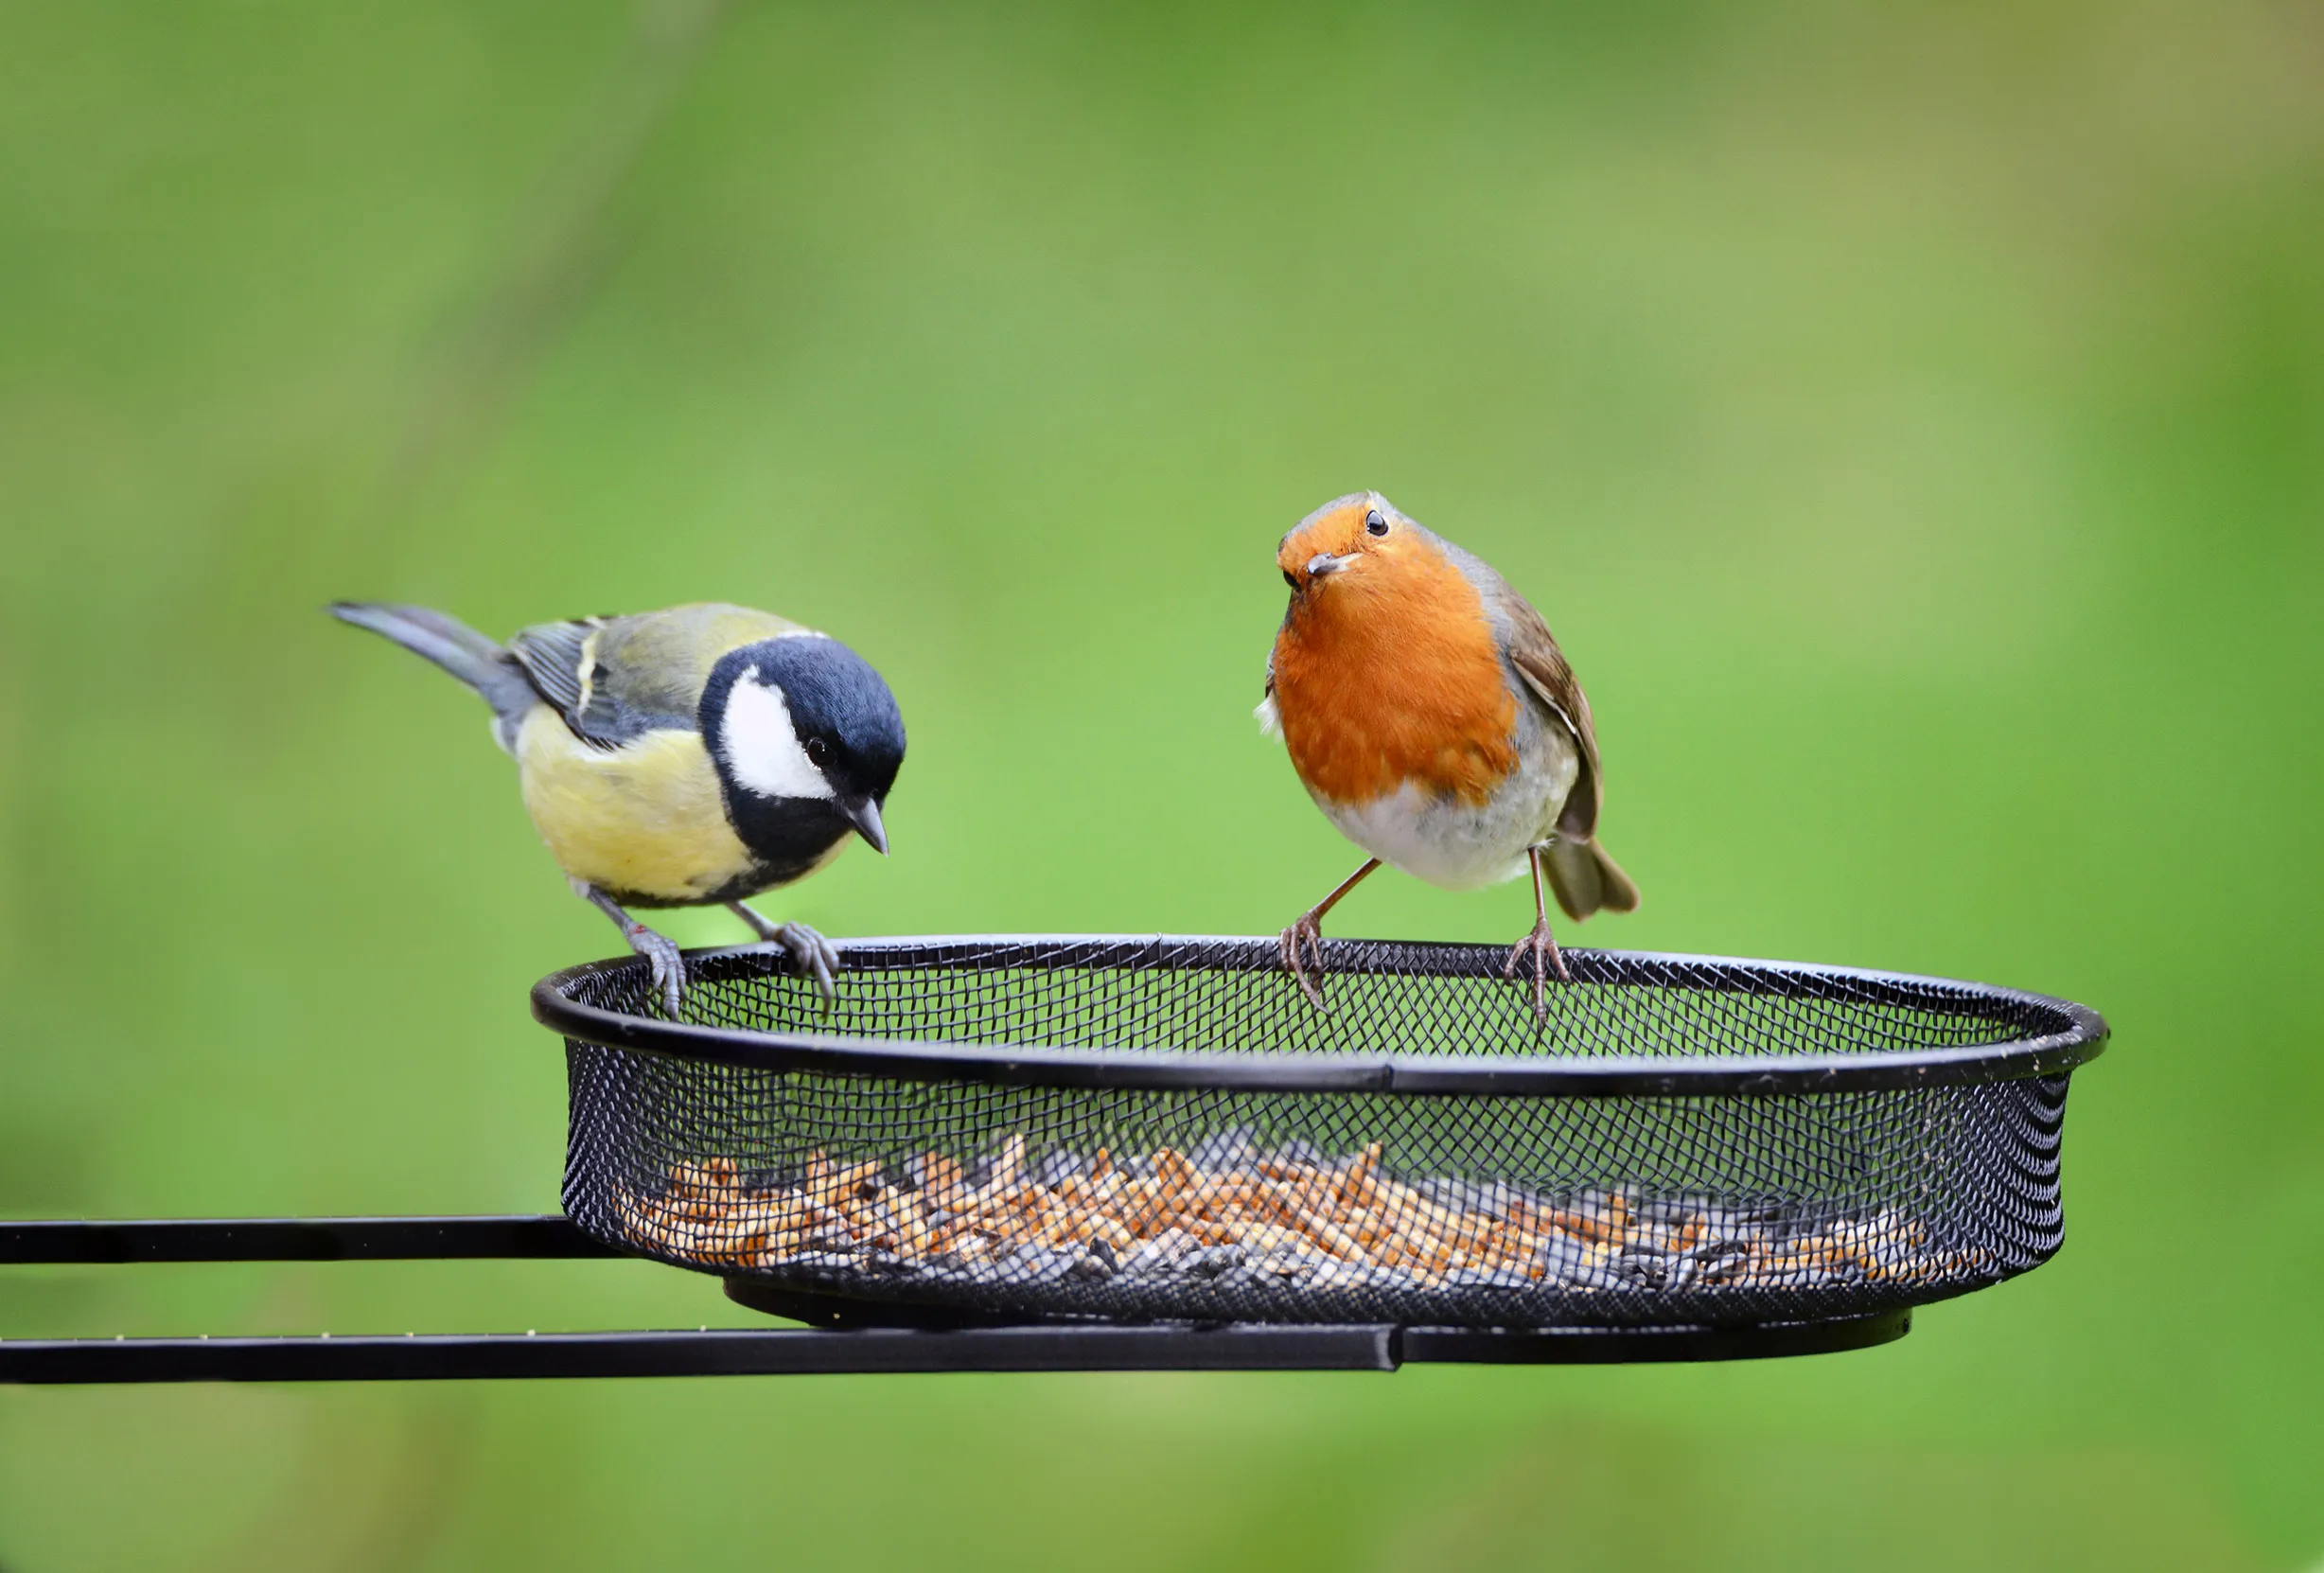 A Great Tit and a Robin perched on a domestic bird feeder together. 